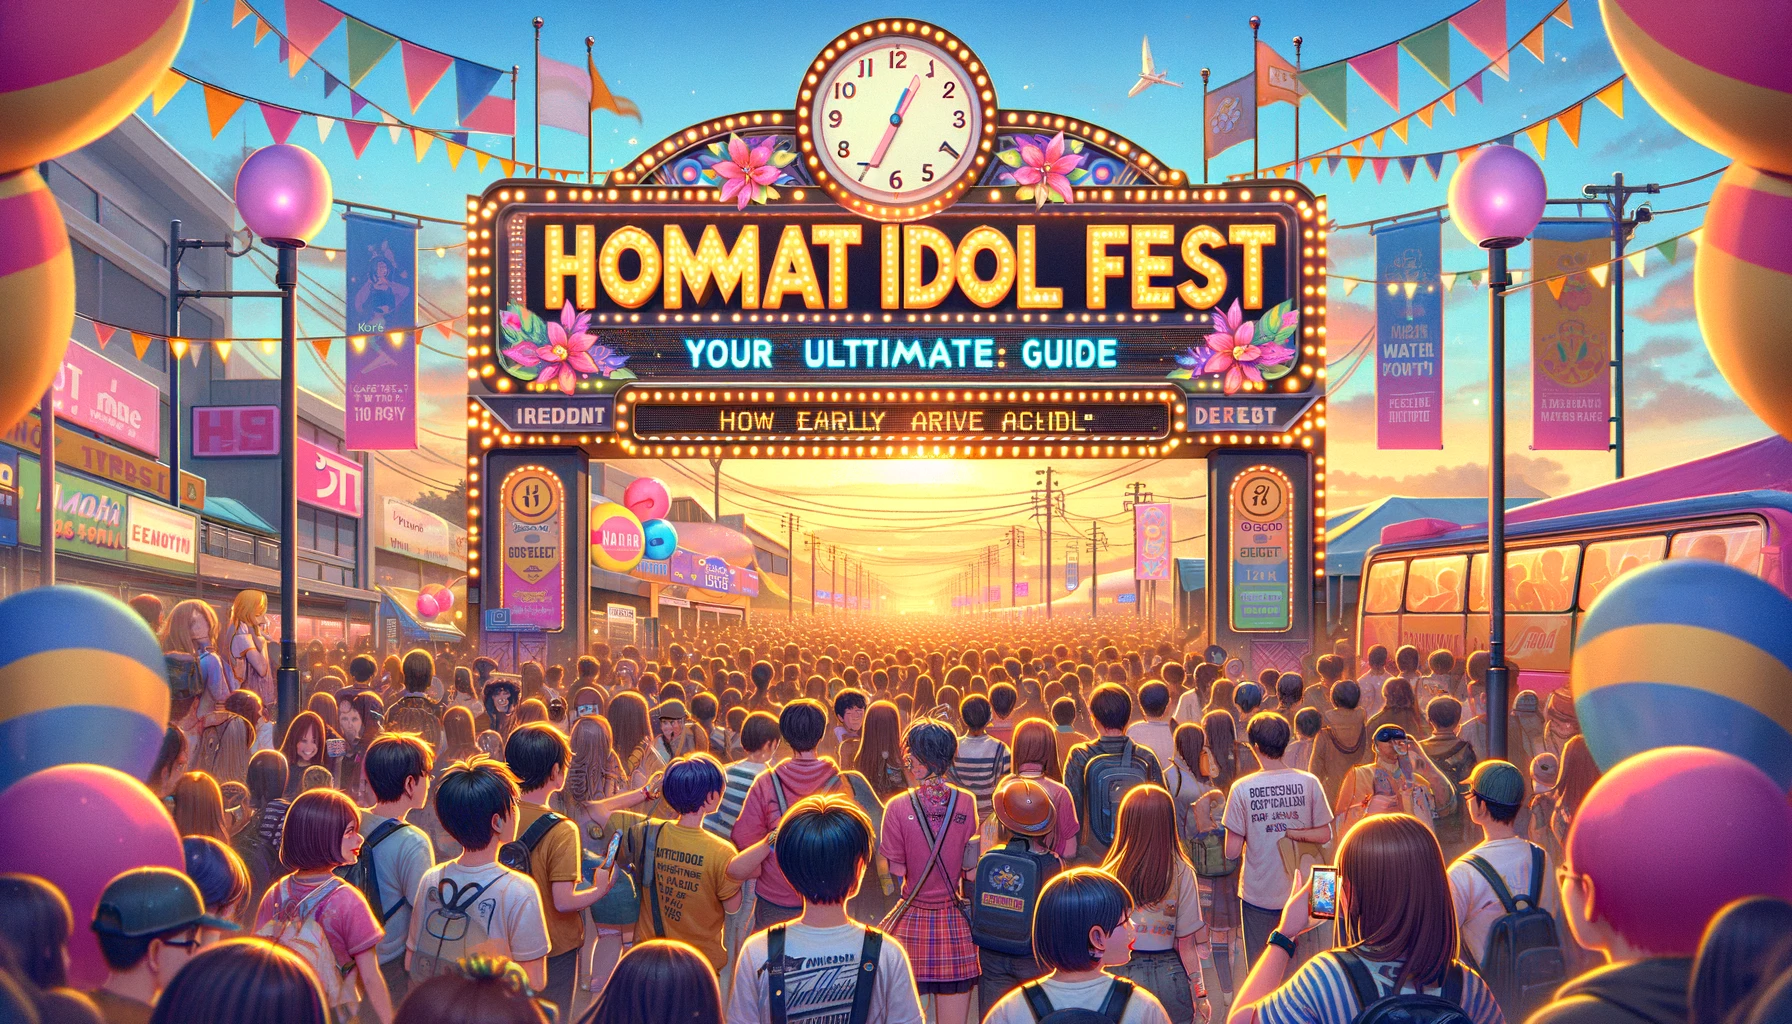 How Early to Arrive at Homat Idol fest